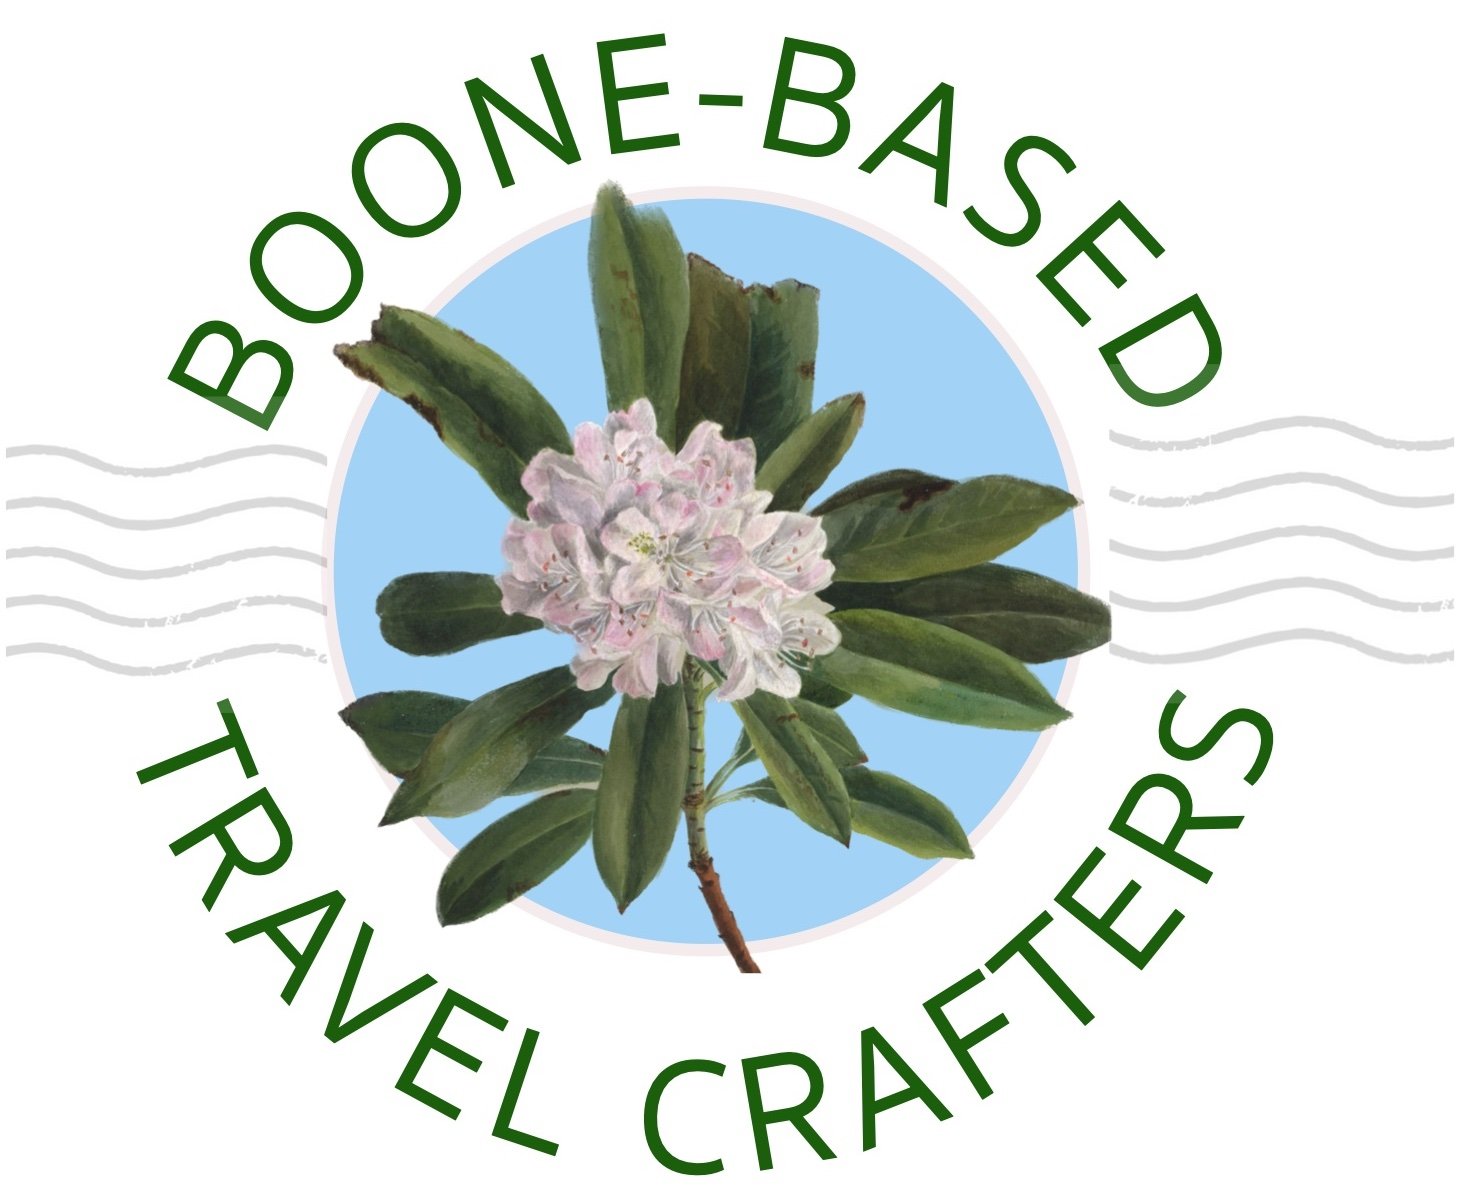 Boone-Based Travel Crafters